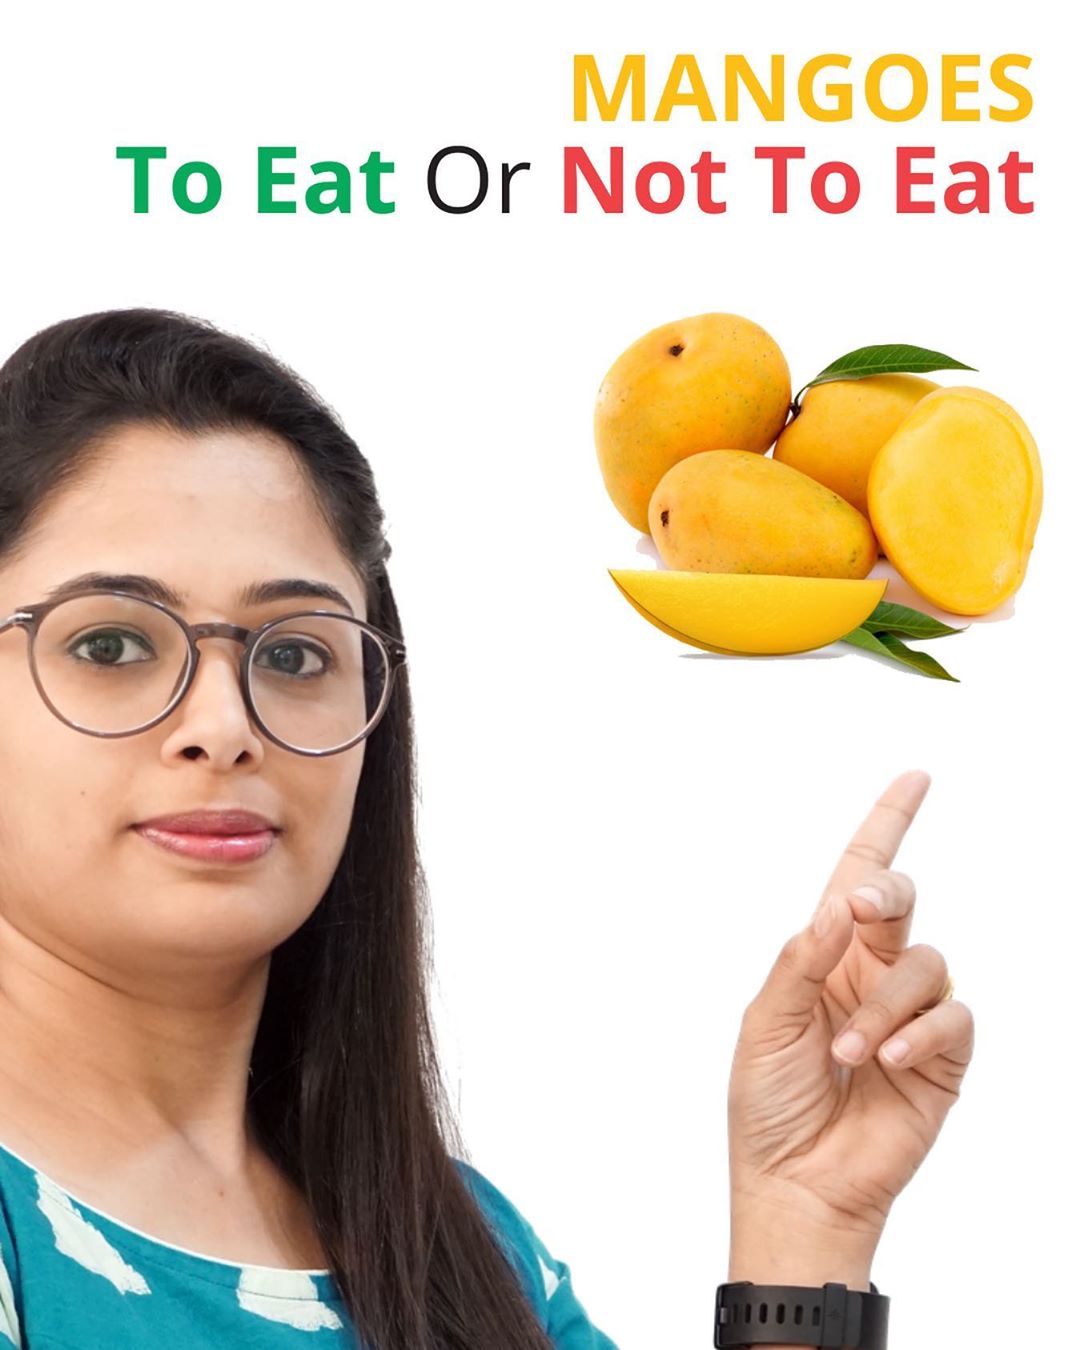 It’s summer time and the season for most of our favourite fruit. Mango 
But all day through what’s app or mail or from clients I get only 1 question “Can I eat mangoes if I have diabetes?” Wouldn’t mangoes raise my sugar levels?”. “ Oh! Mangoes are too much sugar.  Am I going to put on weight if I eat mangoes?”
Check out the video to know mangoes to eat or not to eat. 
https://youtu.be/8dmz7x66AwU
#mangoes #healthy #seasonalfruit #nutrition #youtube #komalpatel